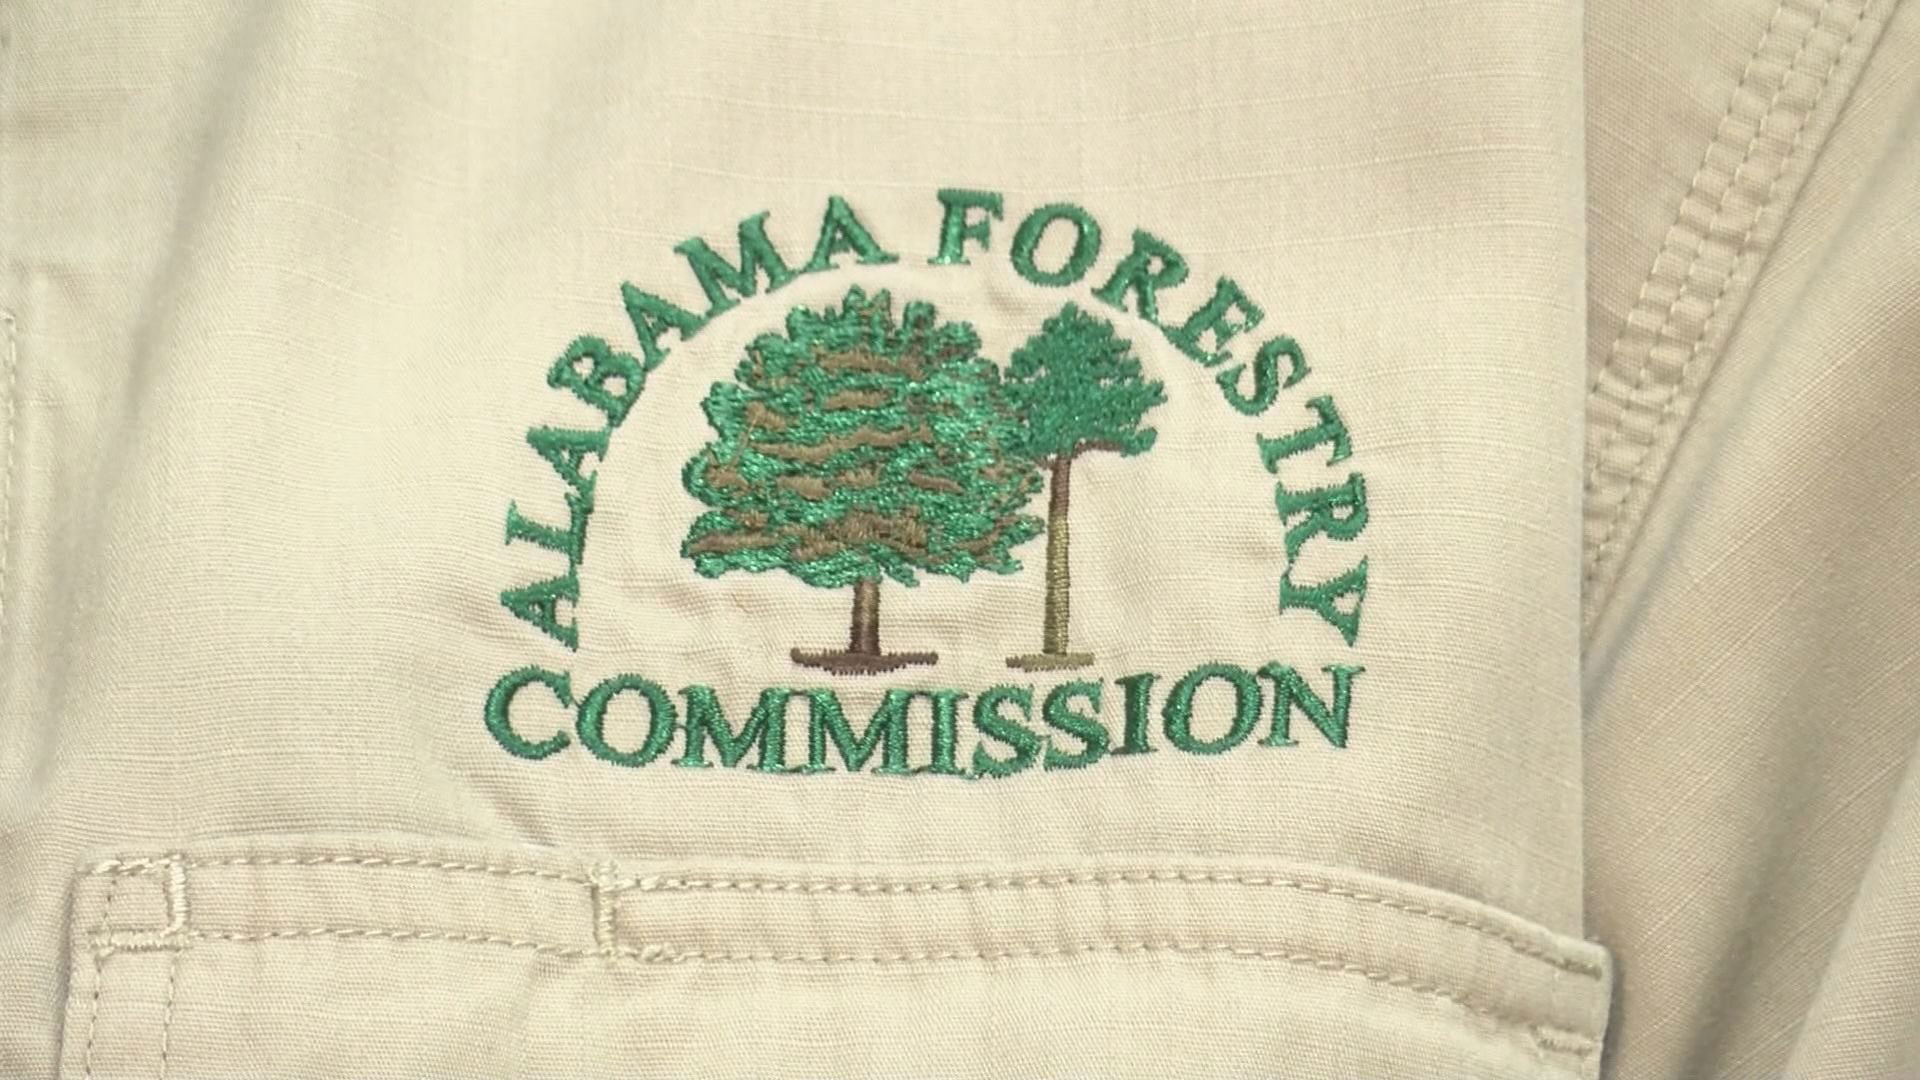 No Burn order lifted in 33 Alabama counties